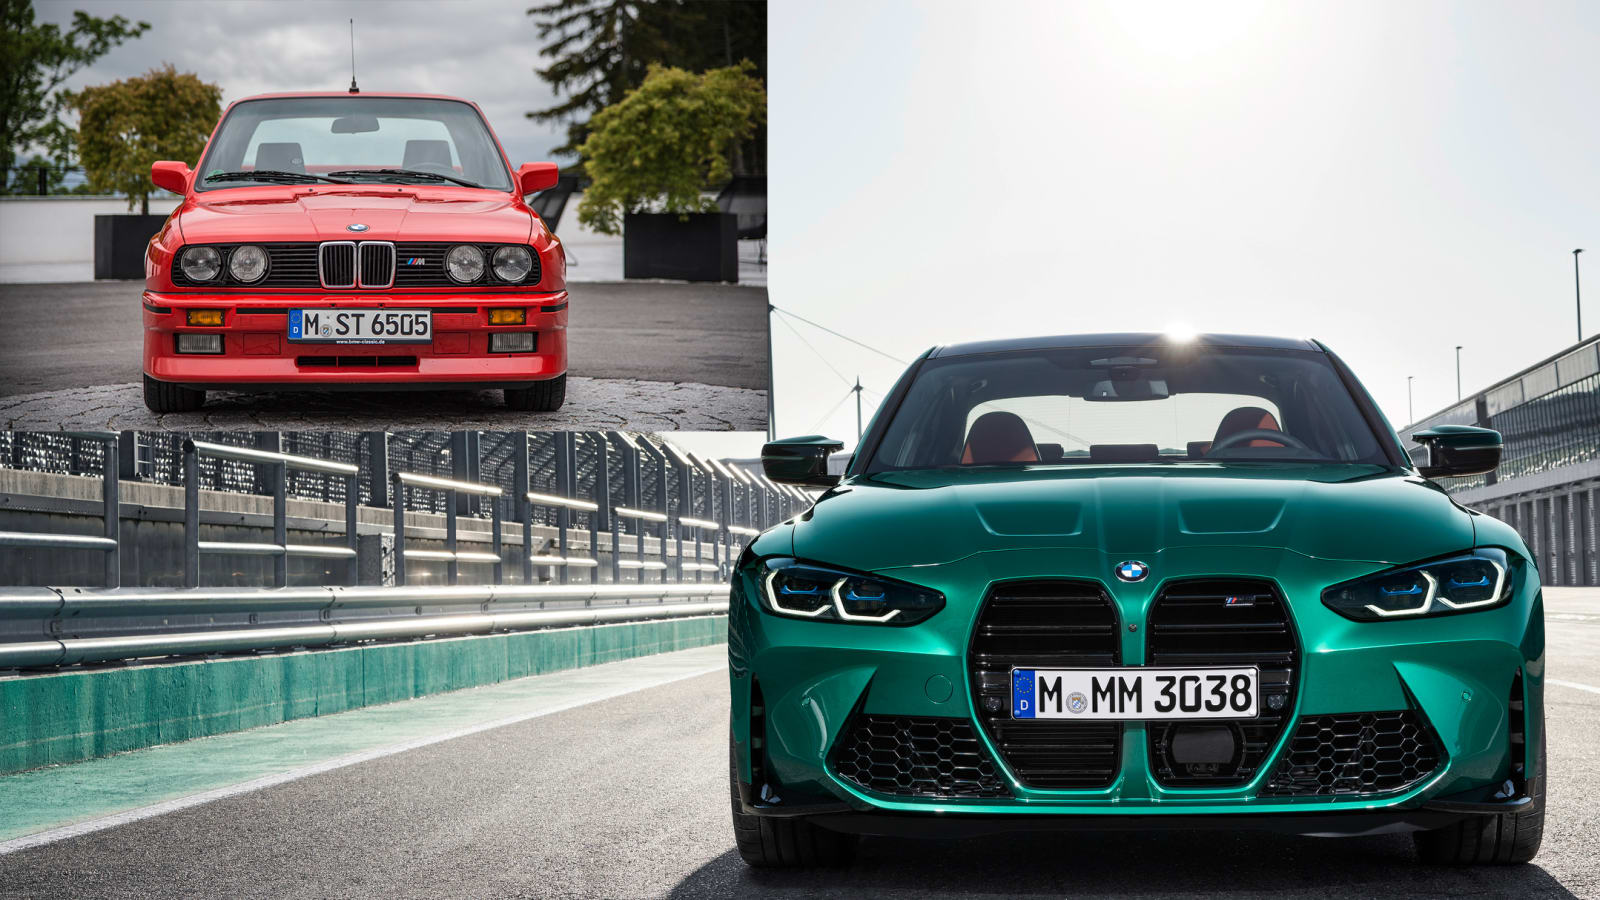 BMW M3 over the decades  Here's what 35 years of M looks like - Autoblog